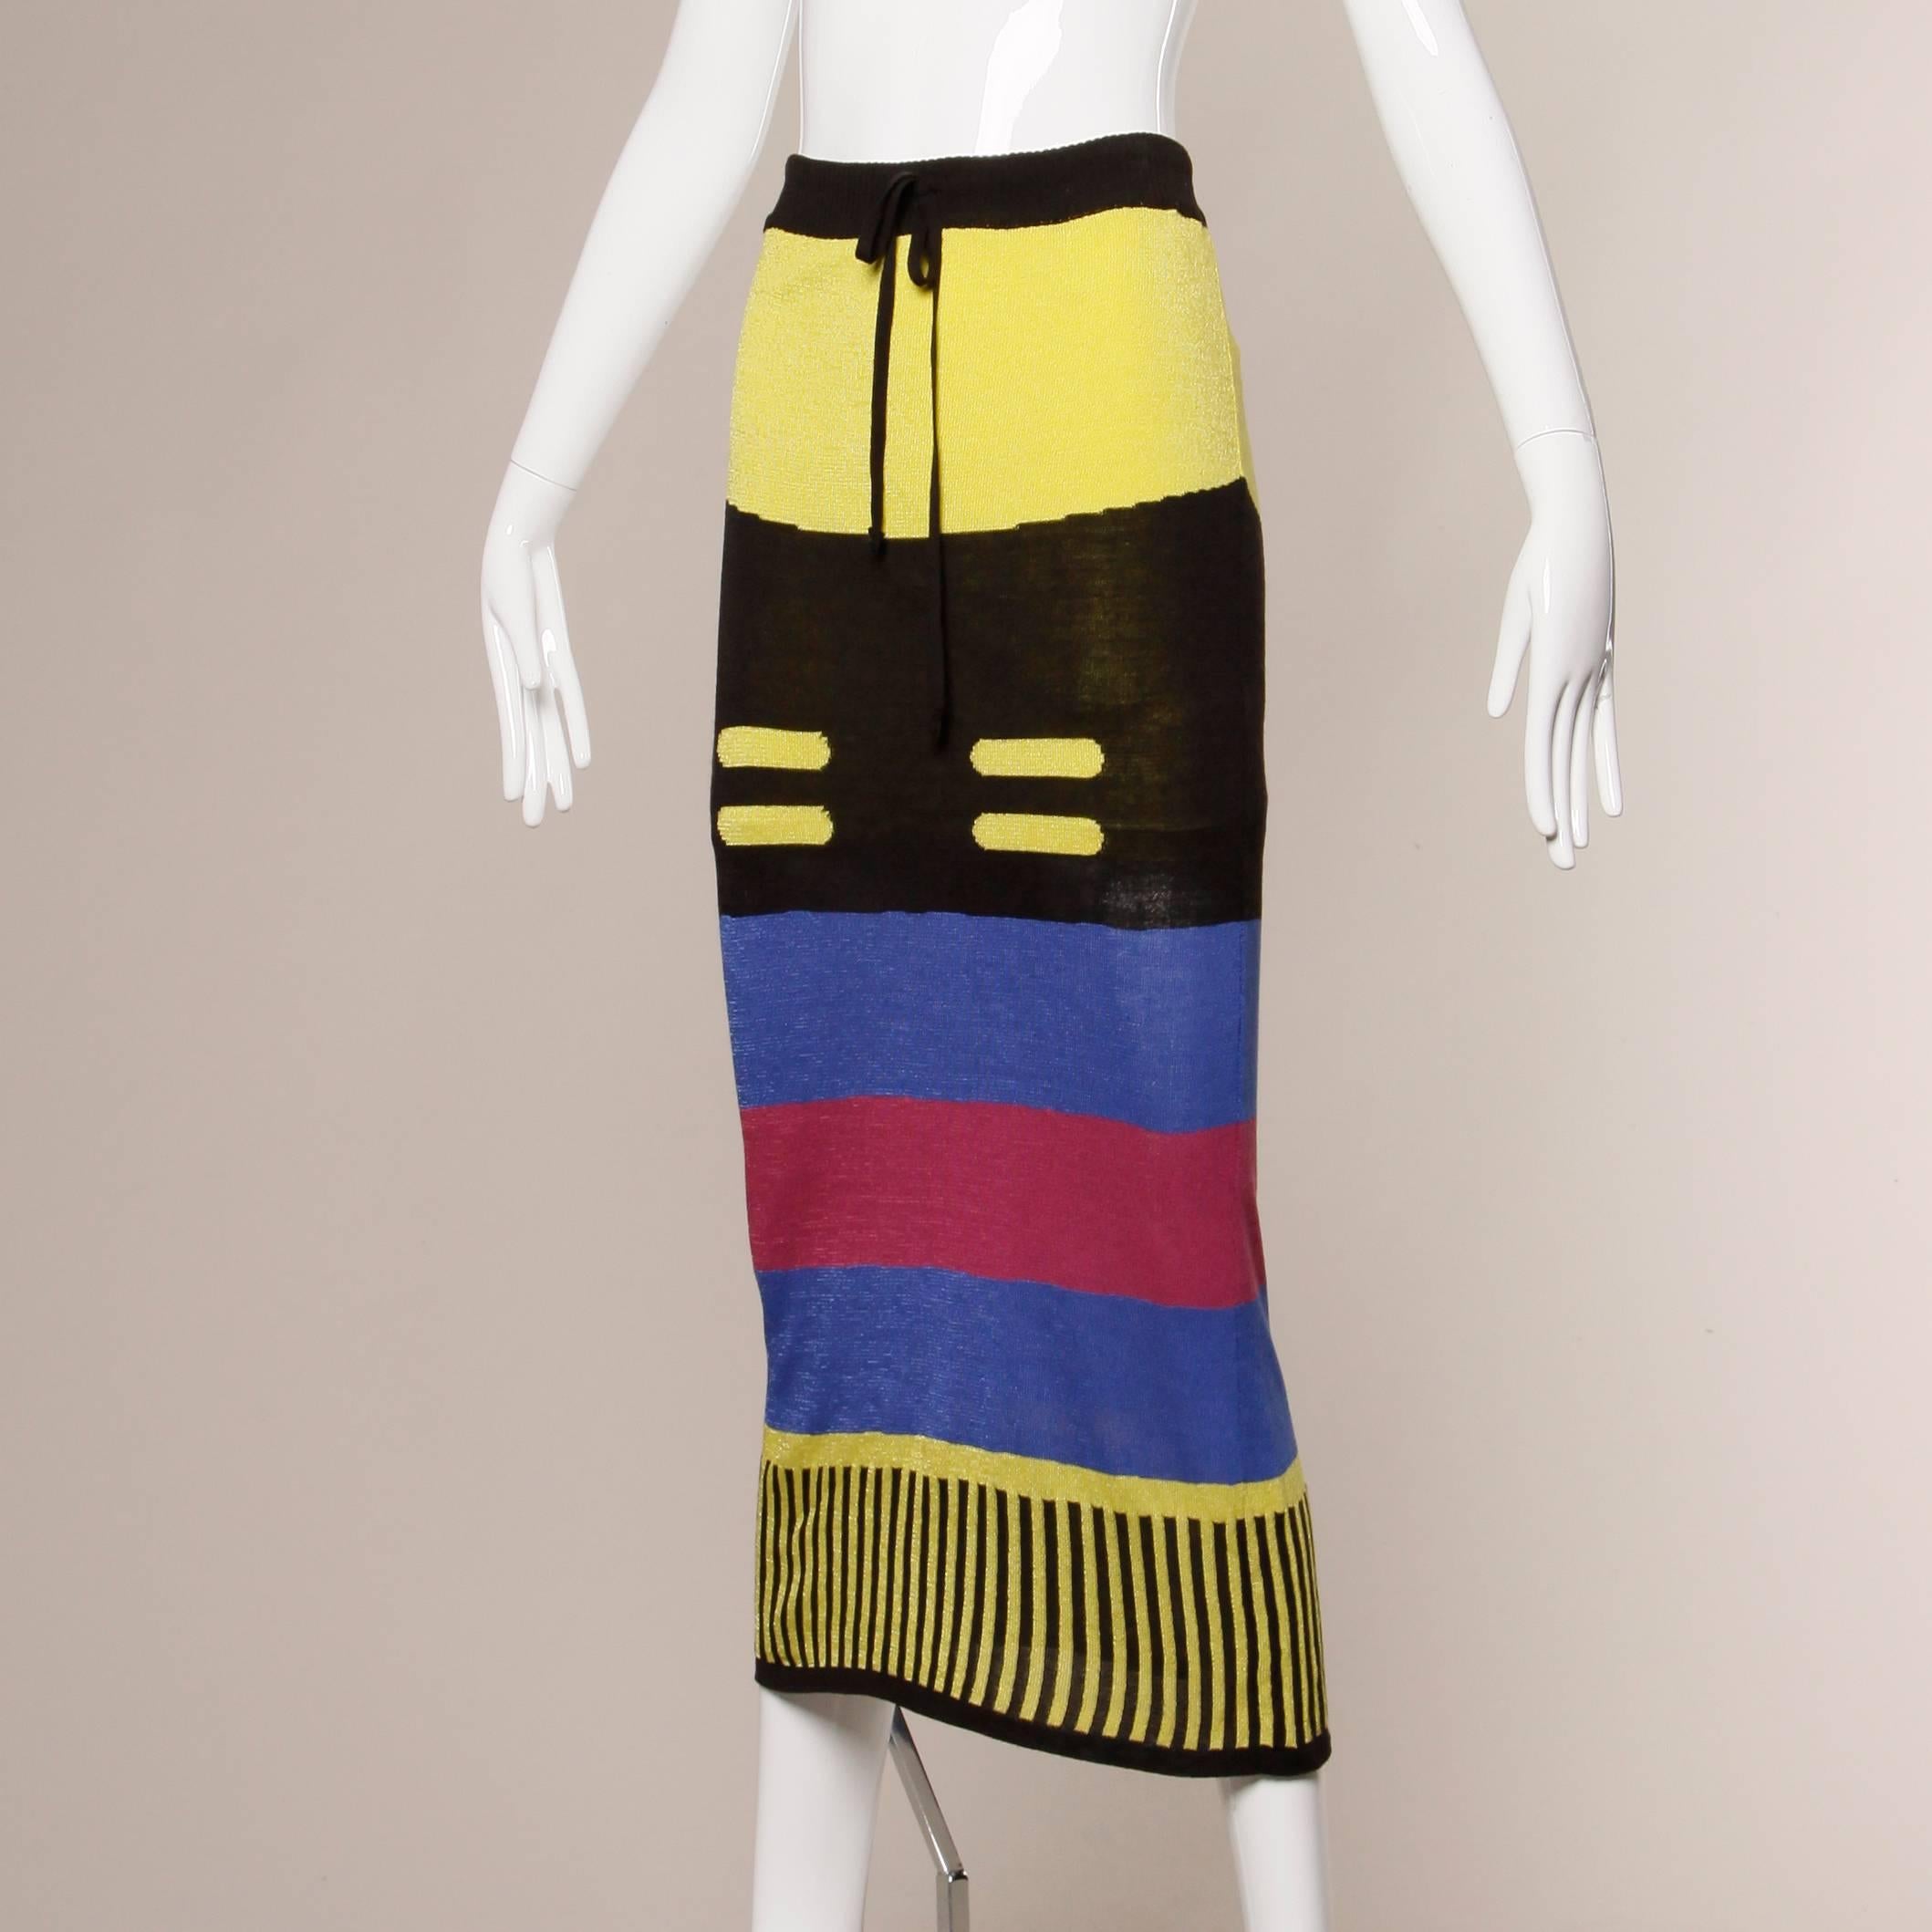 Vibrant Vivienne Westwood Anglomania knit skirt with color blocking and stripes. Drawstring detail at the waistband. Partially lined in cotton jersey knit. Marked size is small. Fits like an XS-Small. Waist measures 24